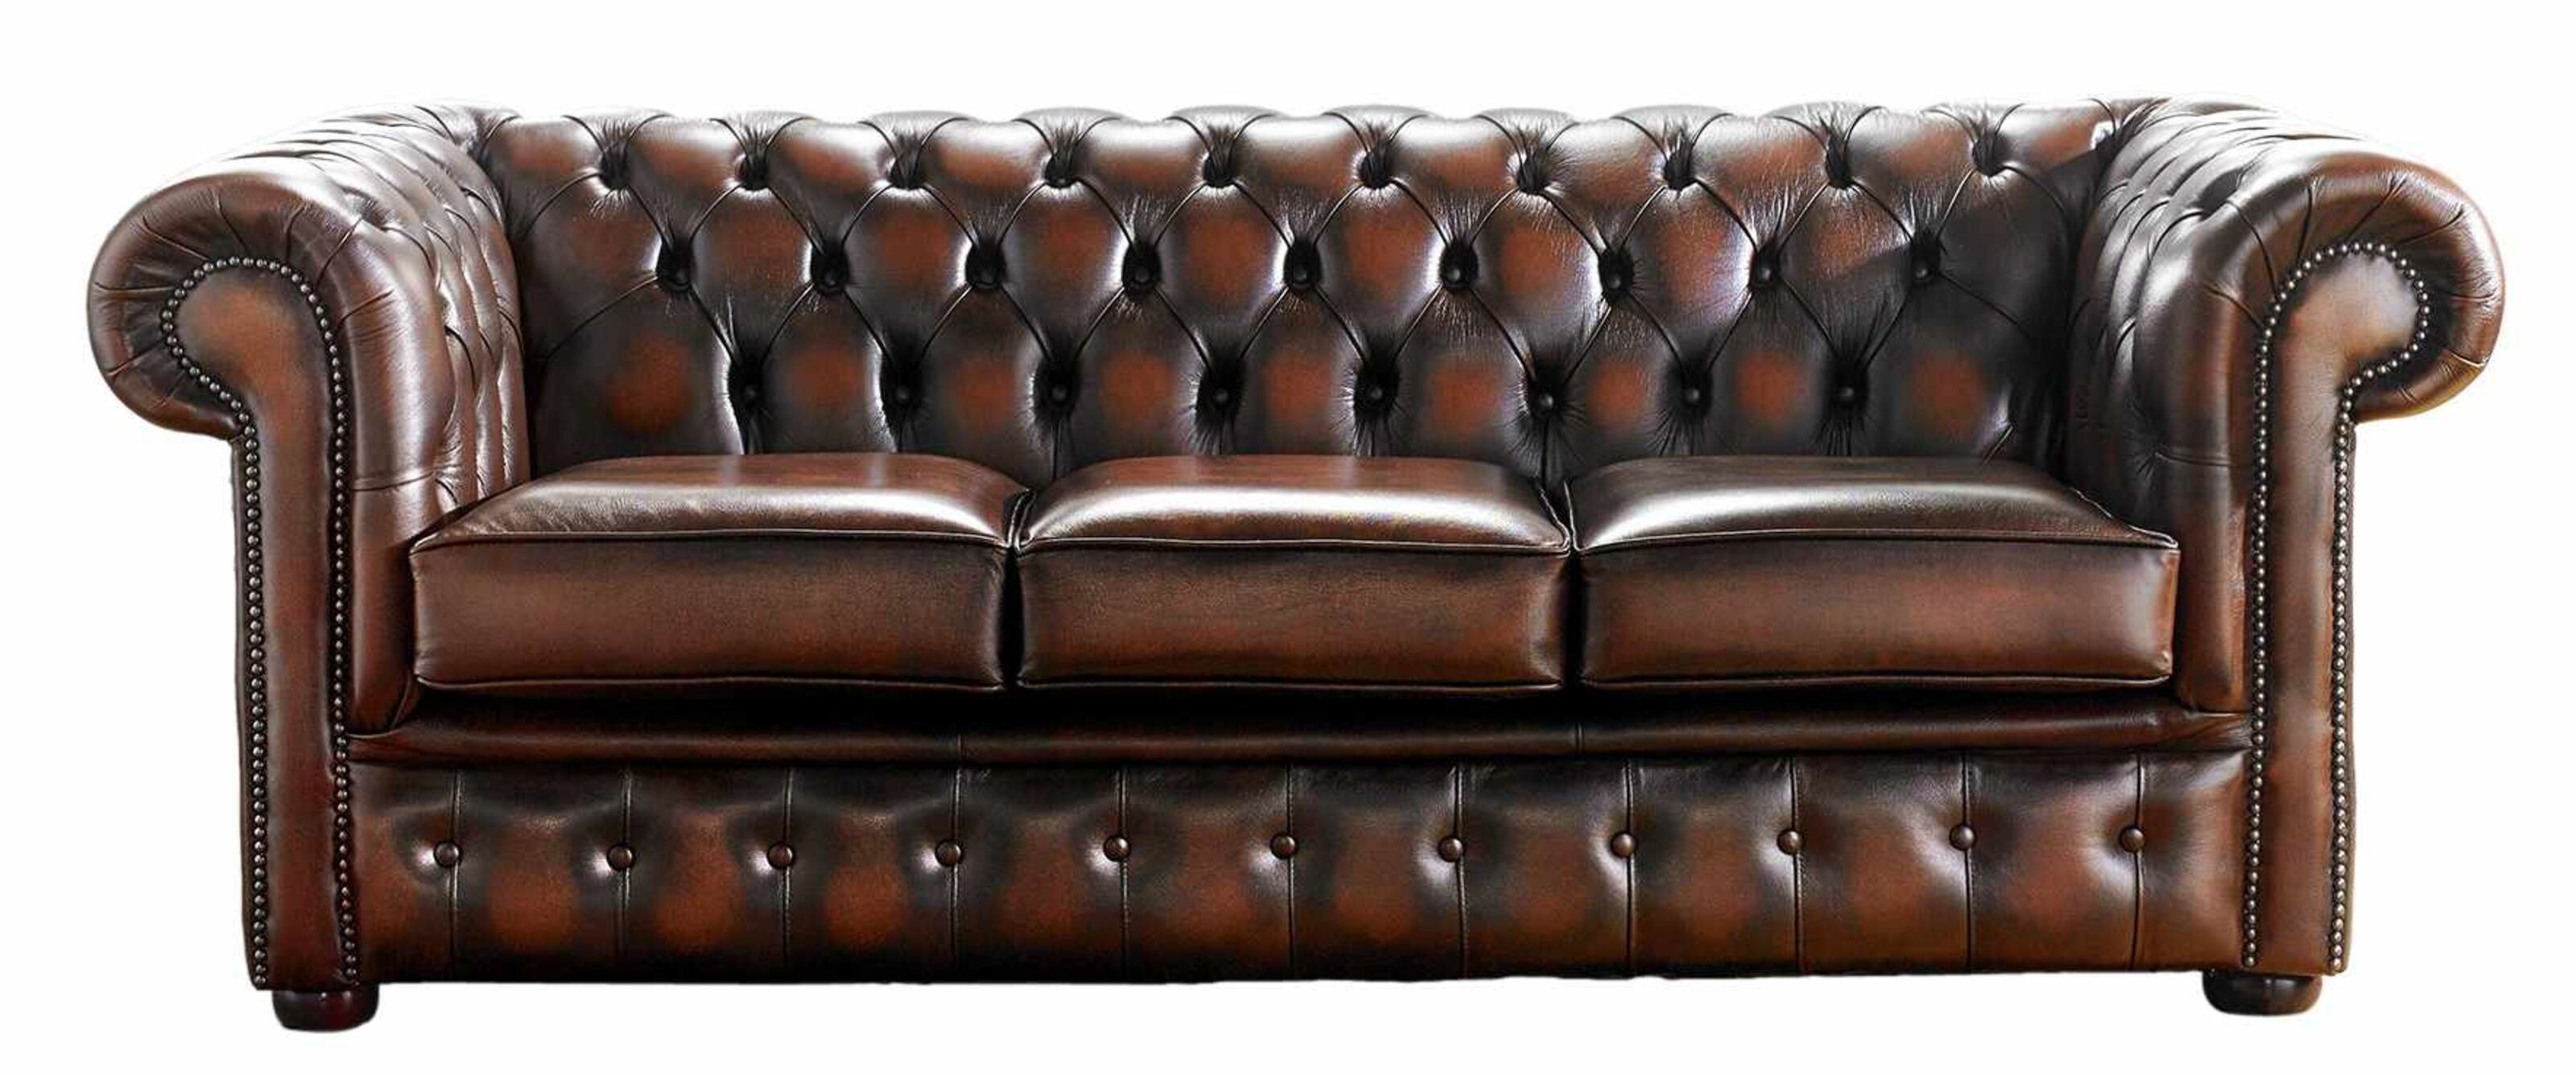 Crafting Elegance The Production Origins of Chesterfield Sofas  %Post Title